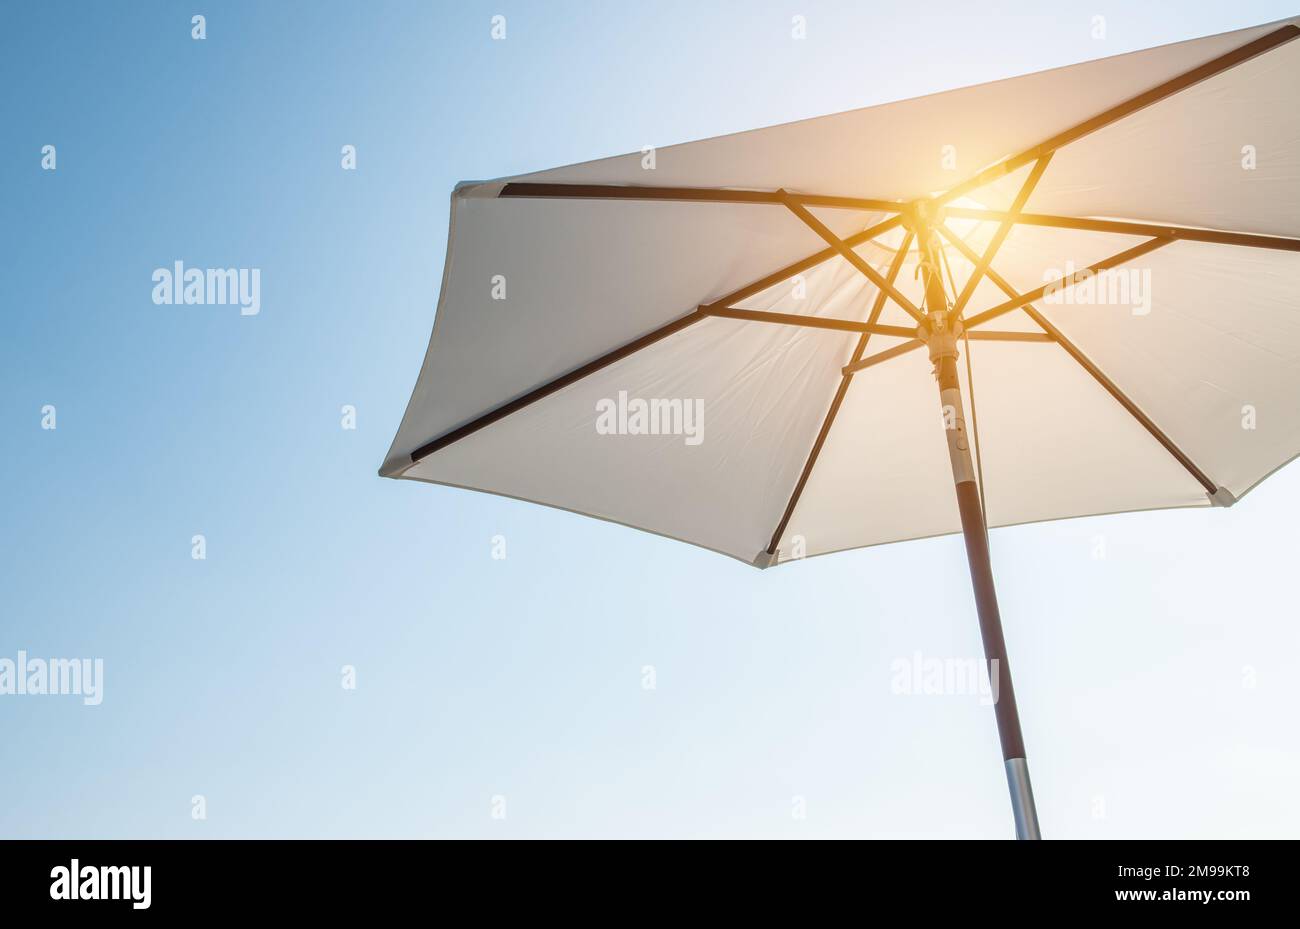 Hot summer relaxation and vacation concept with luxury umbrella. Stock Photo